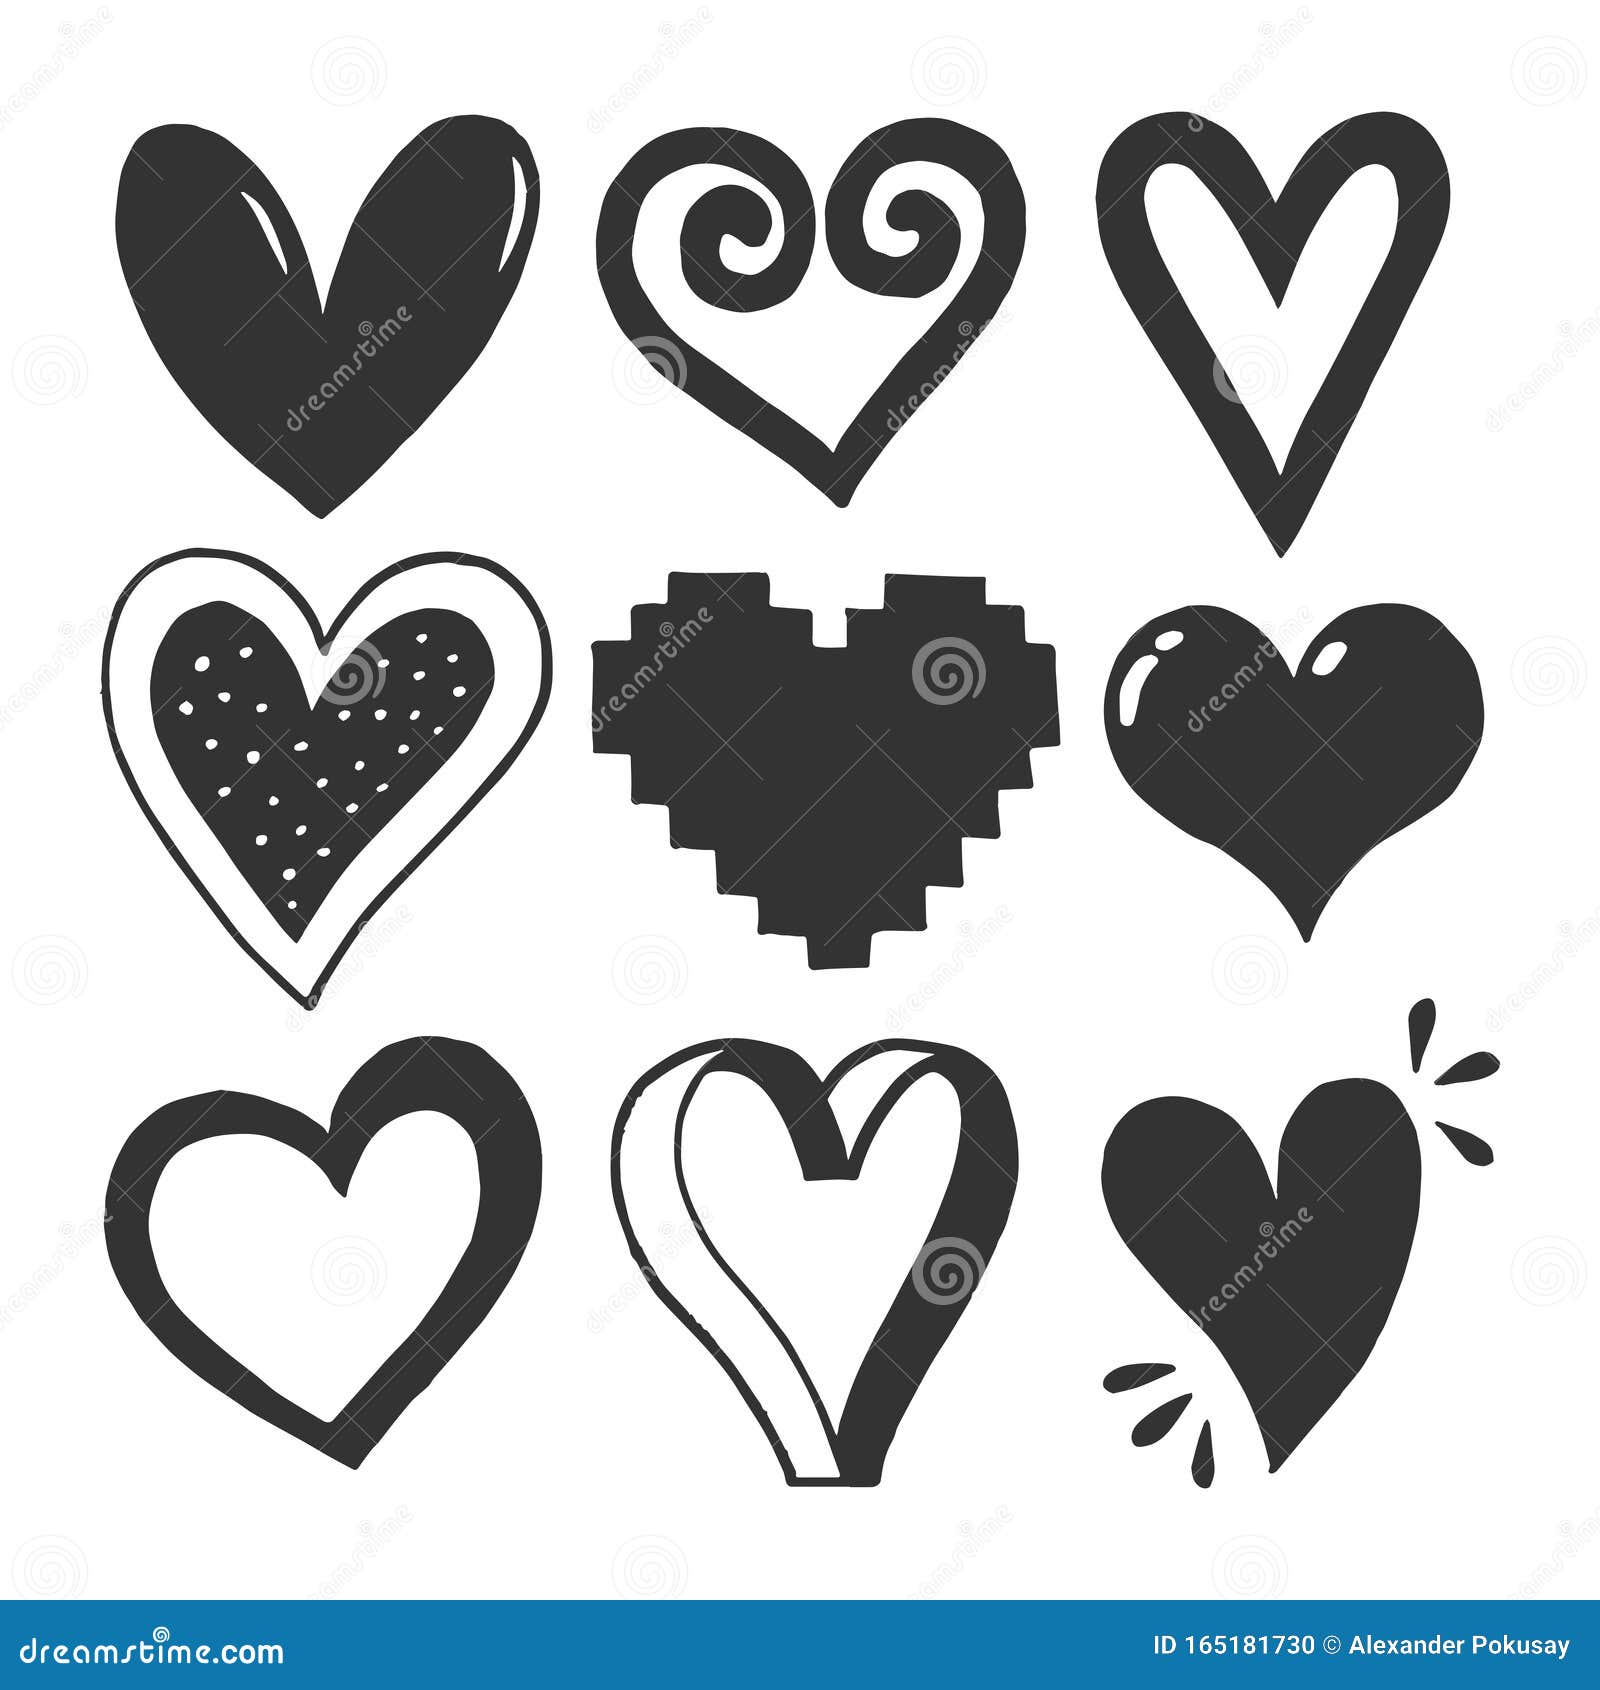 Premium Vector  Doodle heart icon love symbol cute hand drawn vector  graphic illustration isolated on white background simple outline style  sign art sketch pattern